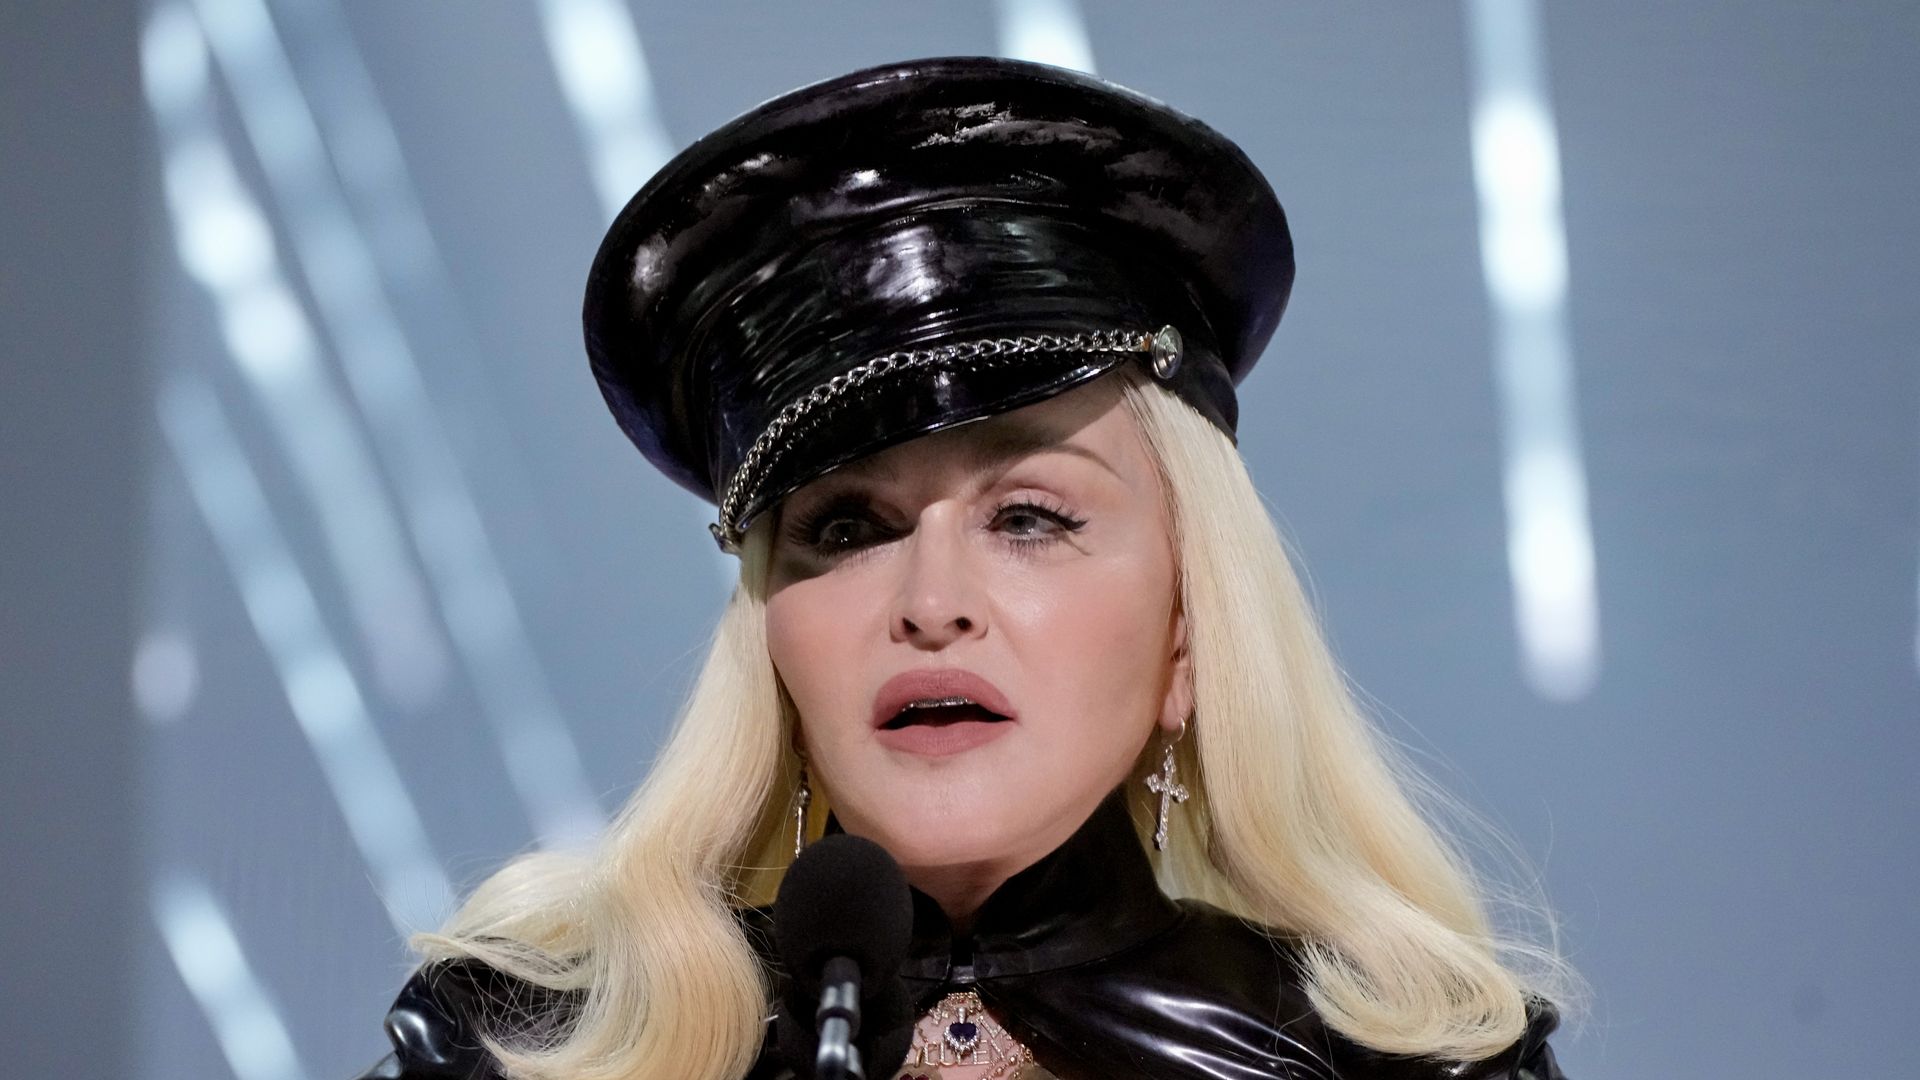 Madonna on stage in PVC